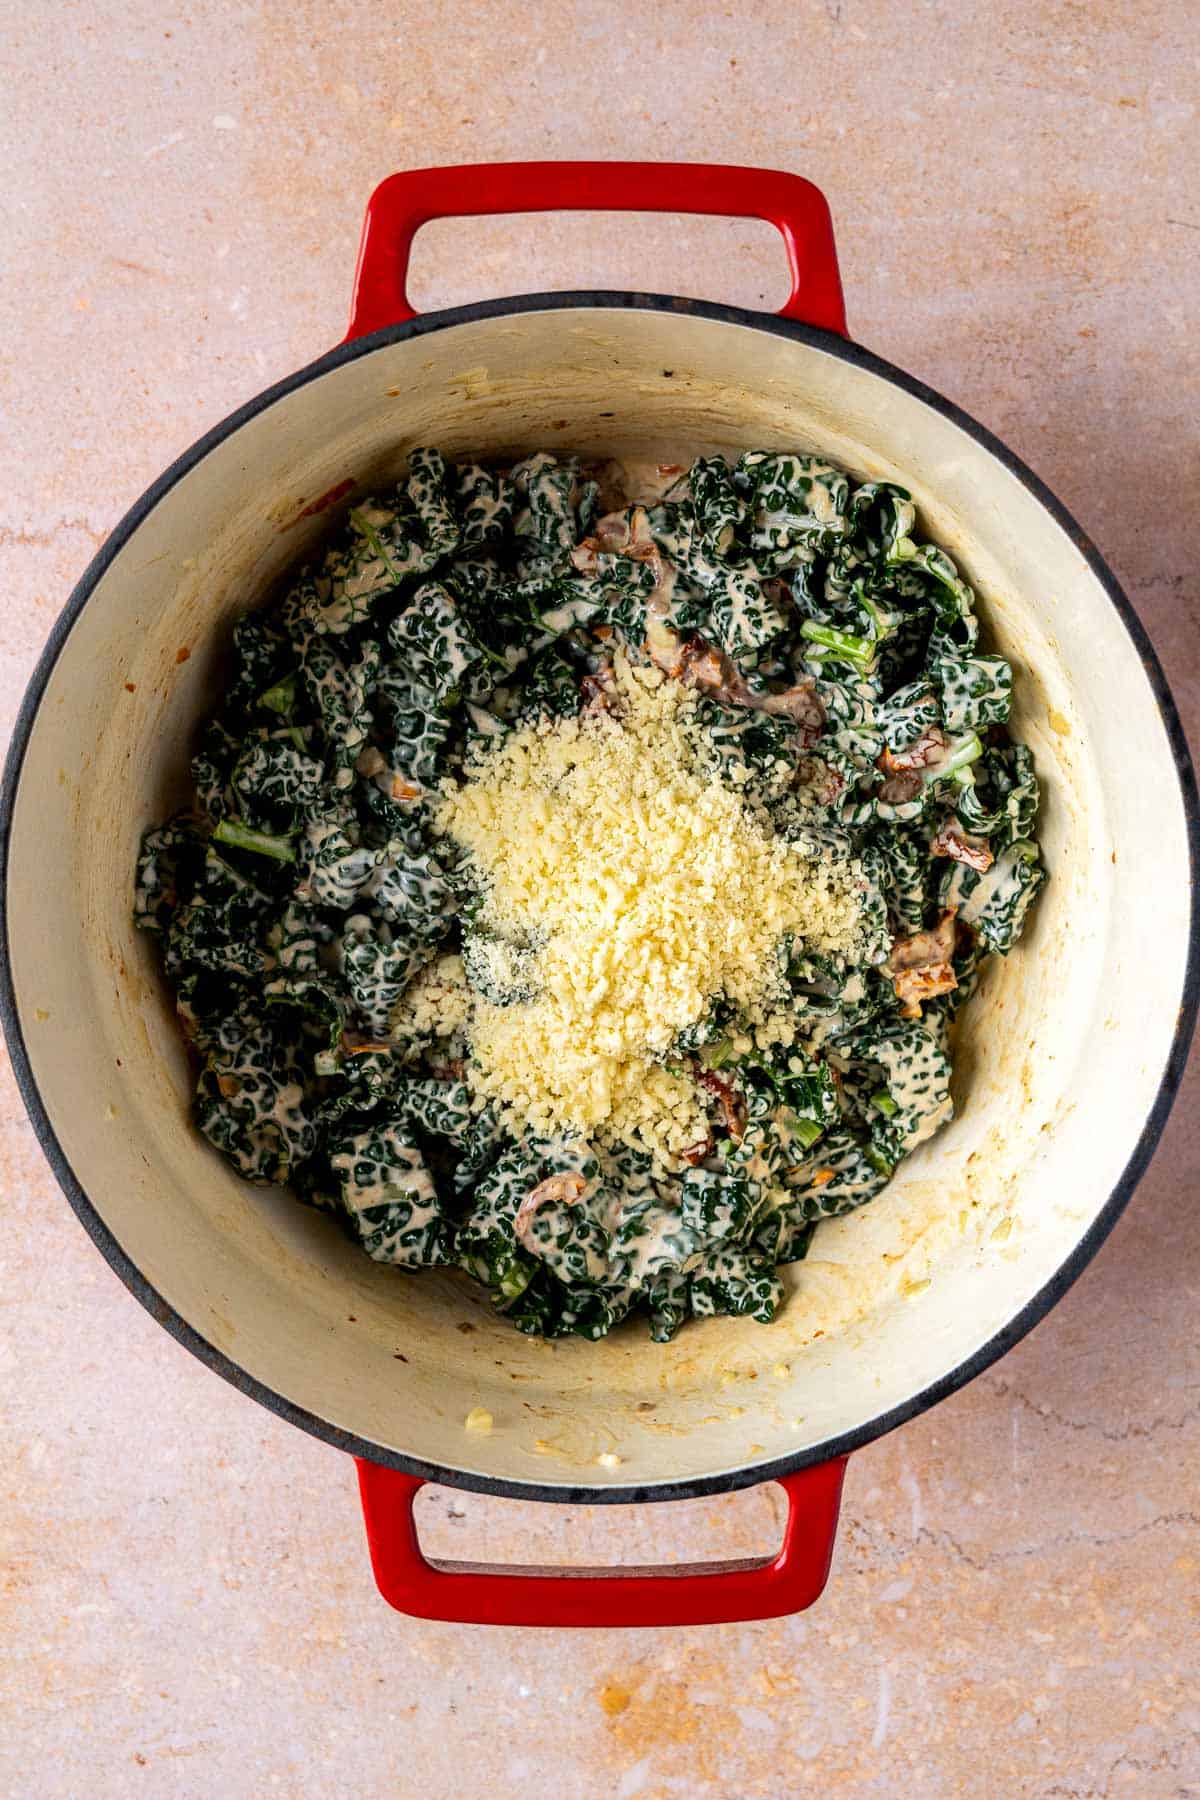 Parmaesan cheese added to cooked kale.